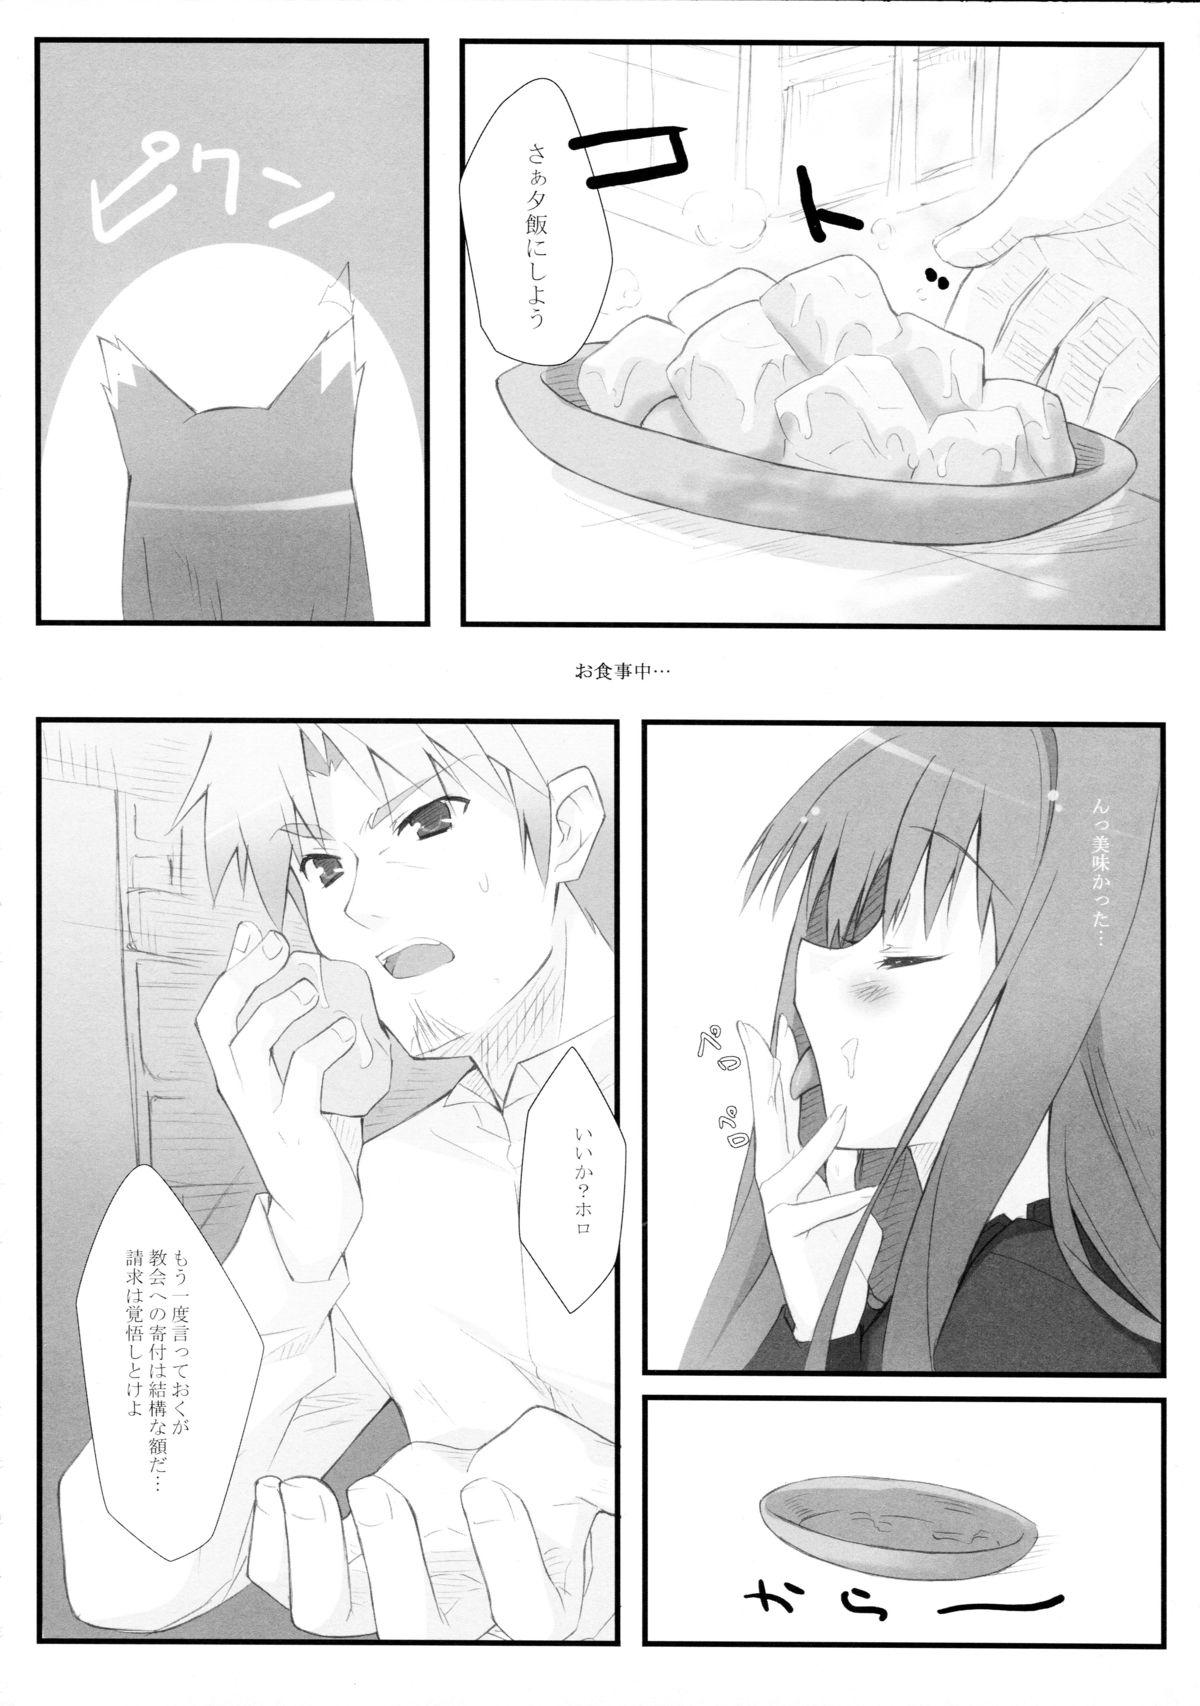 Latino Komugi to Hito to Ookami to - Spice and wolf Rough Sex Porn - Page 4